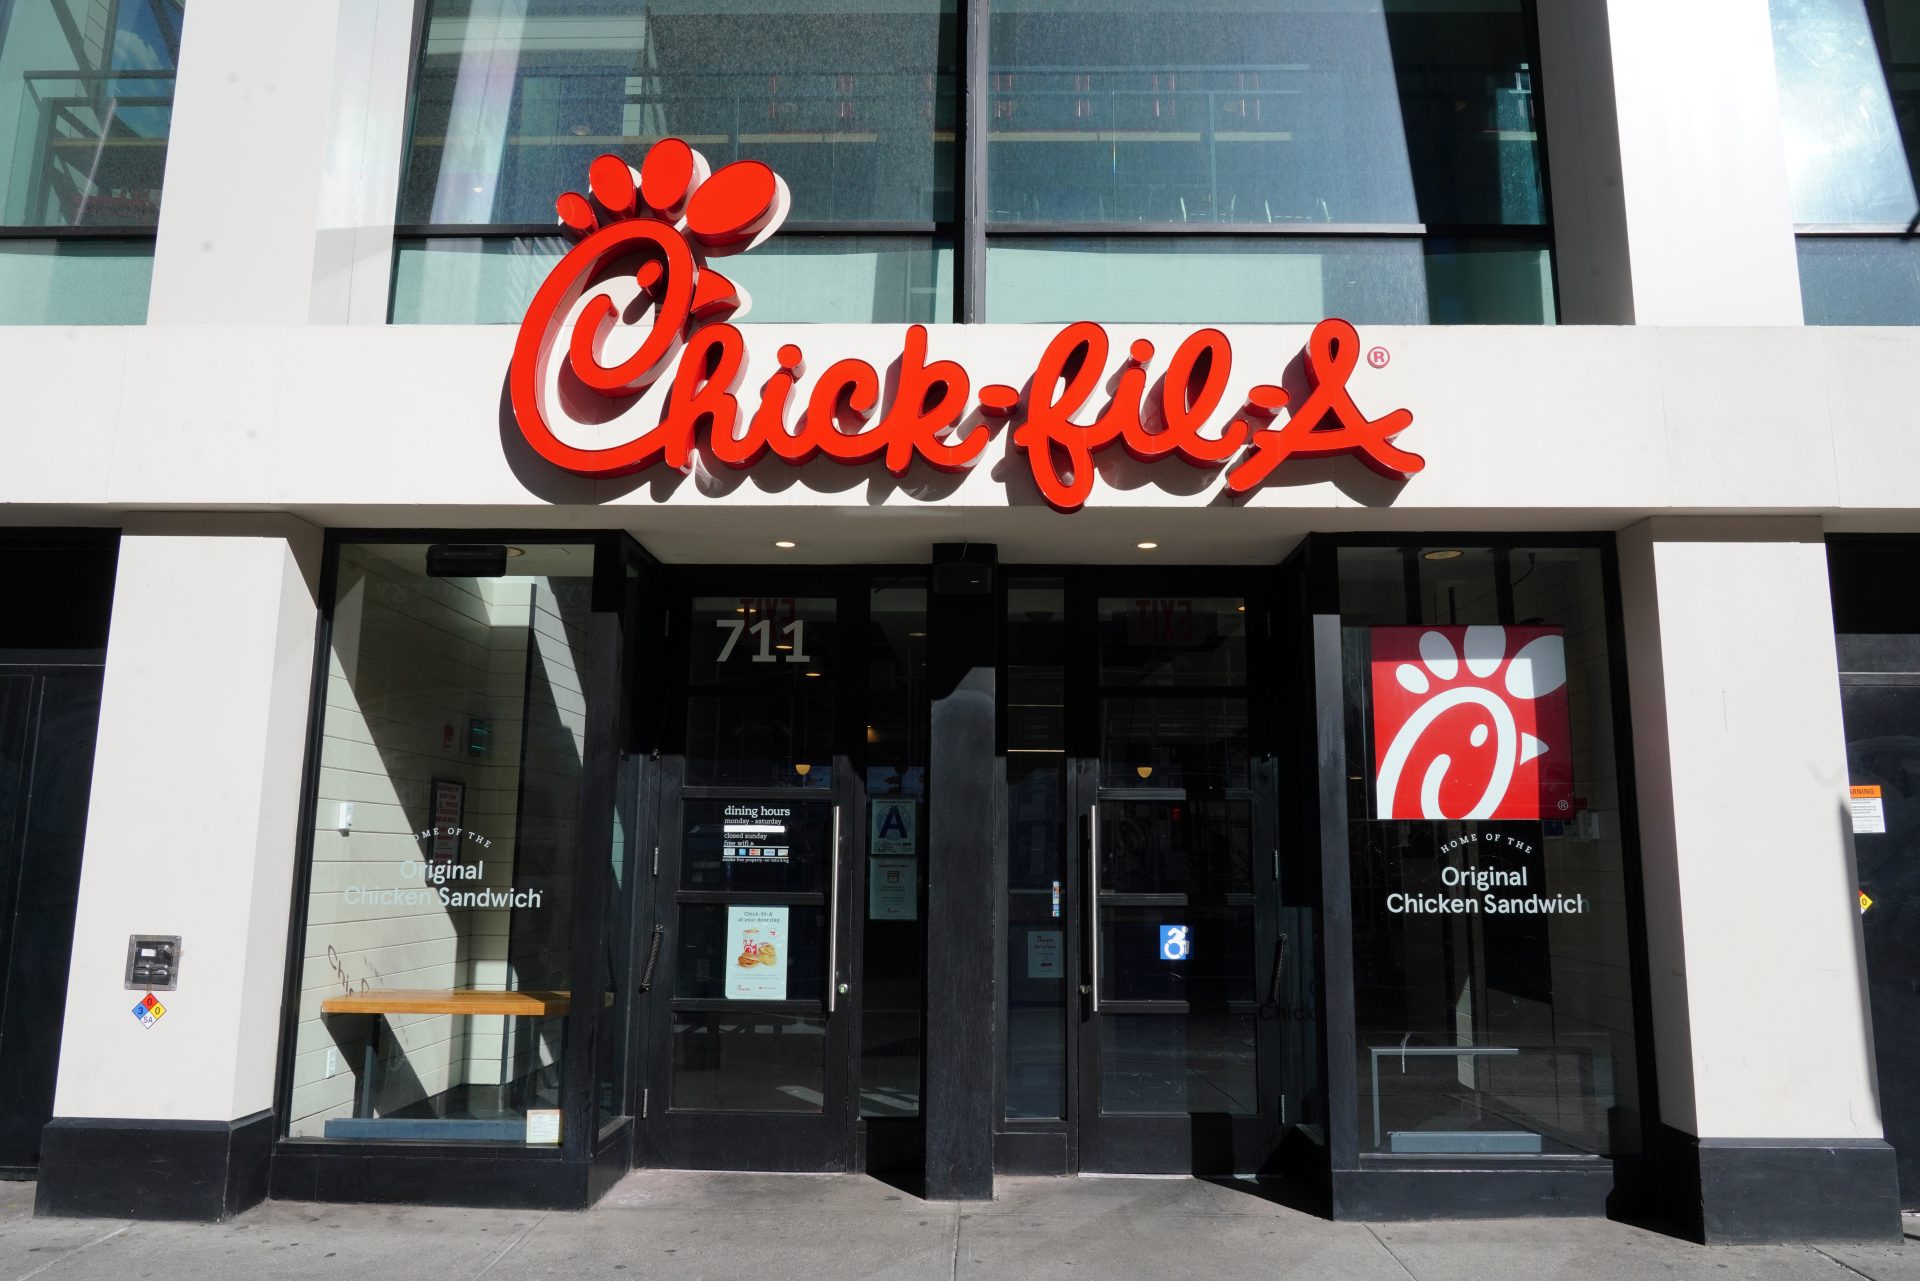 Chick-fil-A Testing Out Food Delivery Robots To “Enhance Restaurant Operations”